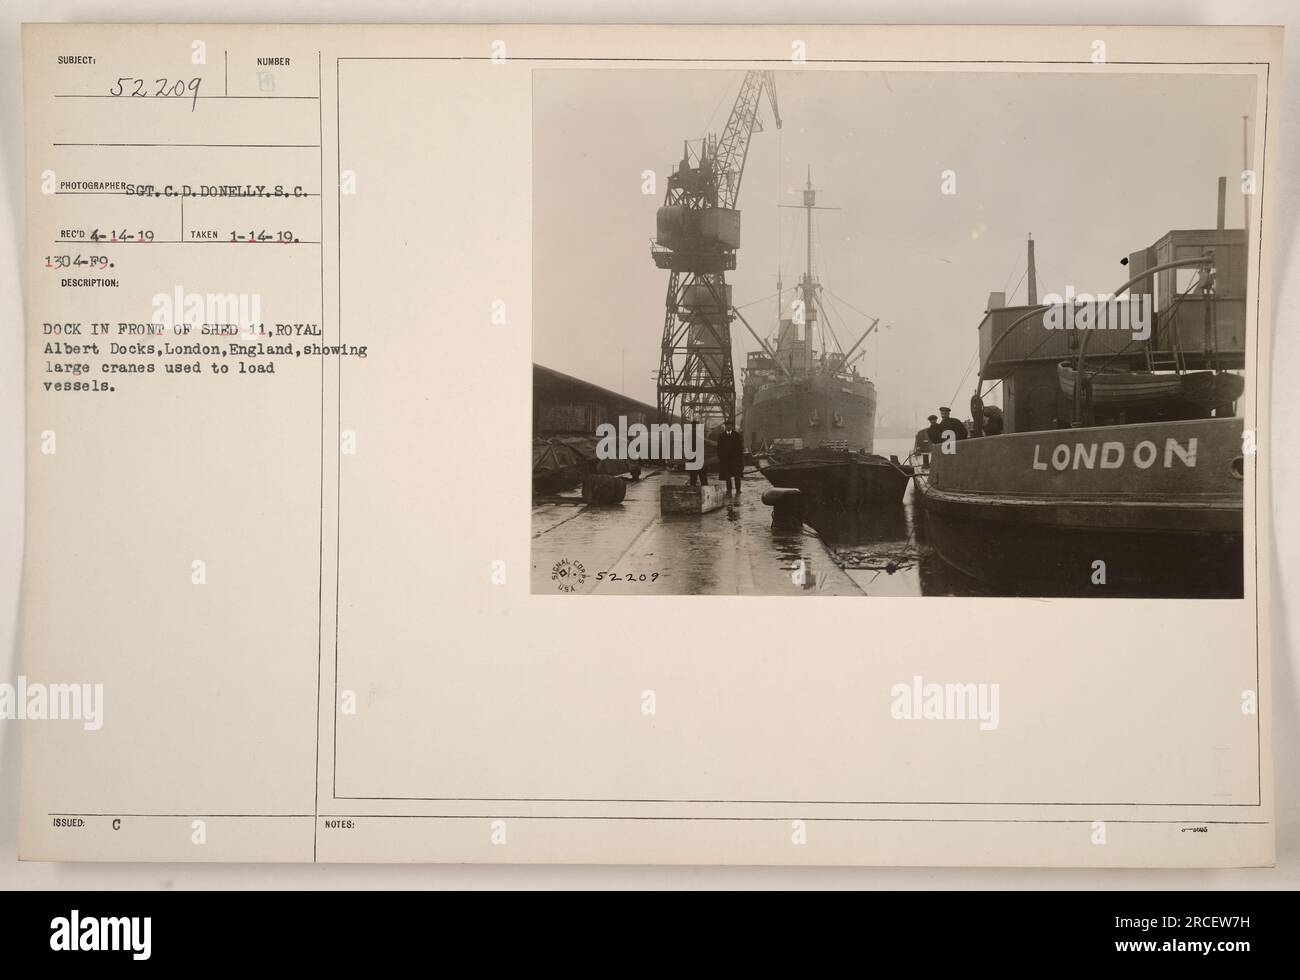 Dock at Royal Albert Docks, London, England, showing cranes used for loading vessels. Panel labels indicate the details of the photograph, including the subject, photographer, date, and description. This image is part of the collection 'Photographs of American Military Activities during World War One.' Stock Photo